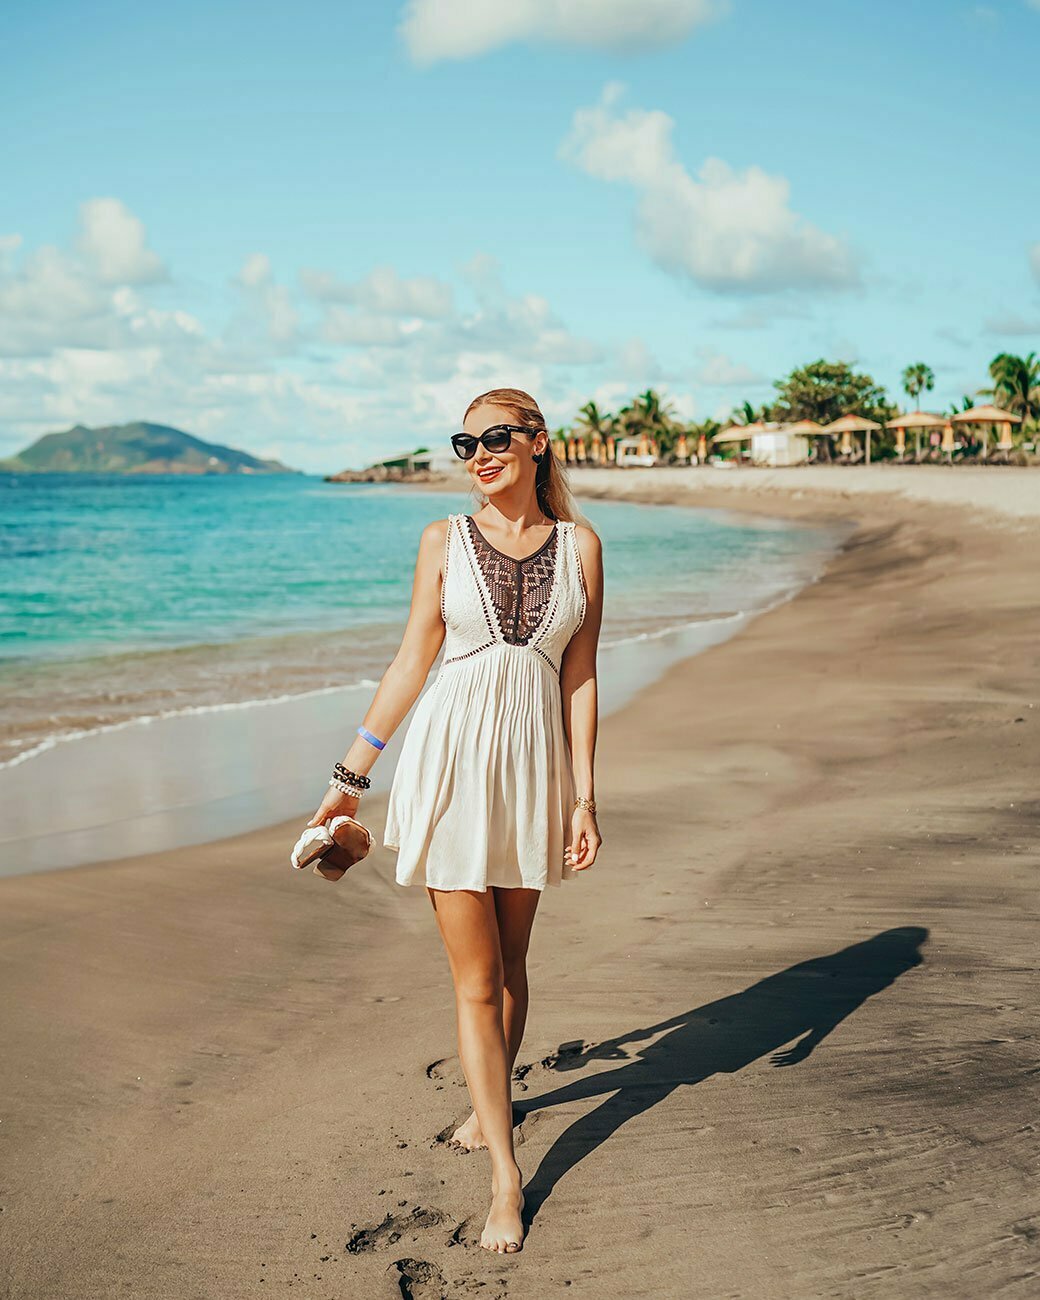 Four Seasons Nevis | Best Base to Explore St. Kitts and Nevis | Facts About St. Kitts and Nevis | Best Things to Do in St. Kitts and Nevis | Bubbly Moments